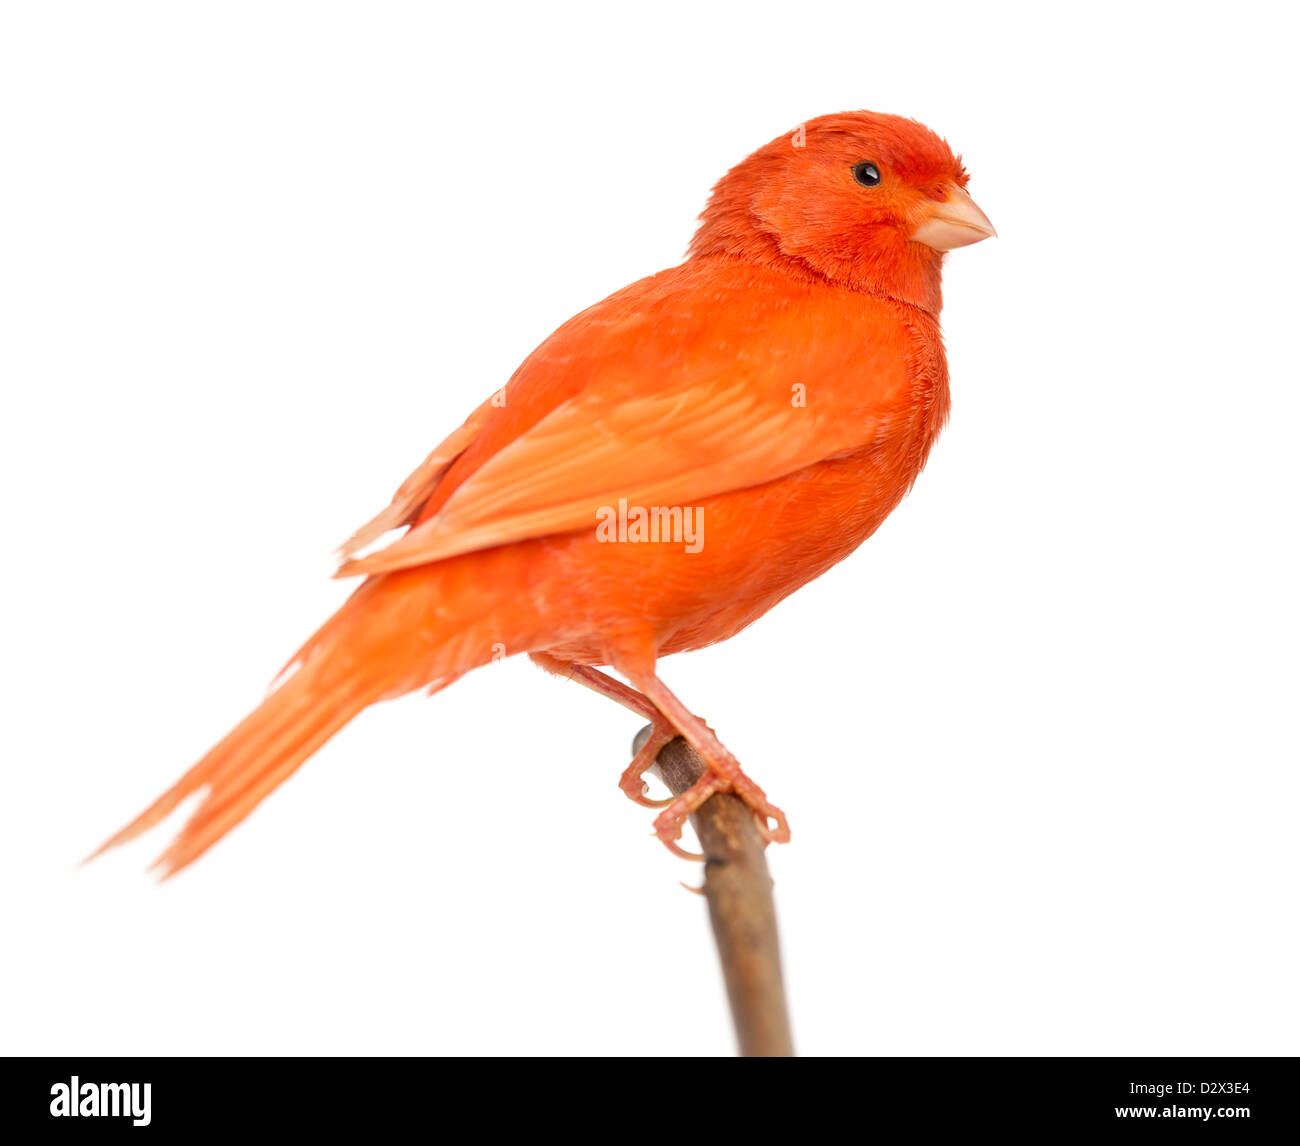 Red canary, Serinus canaria, perched on a branch against white background Stock Photo